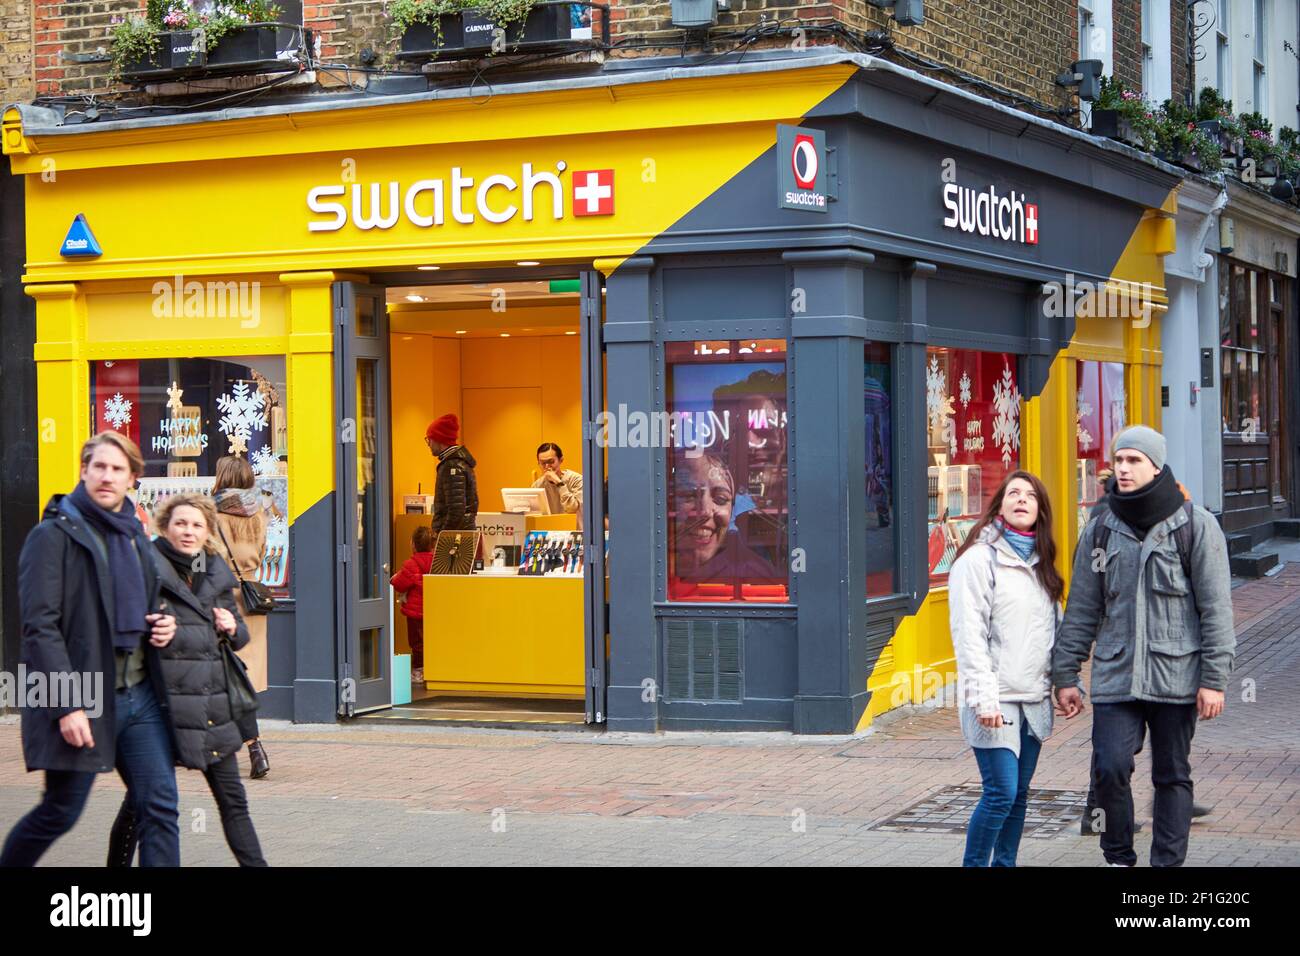 General view of the Swatch shop on Carnaby Street in London Stock Photo